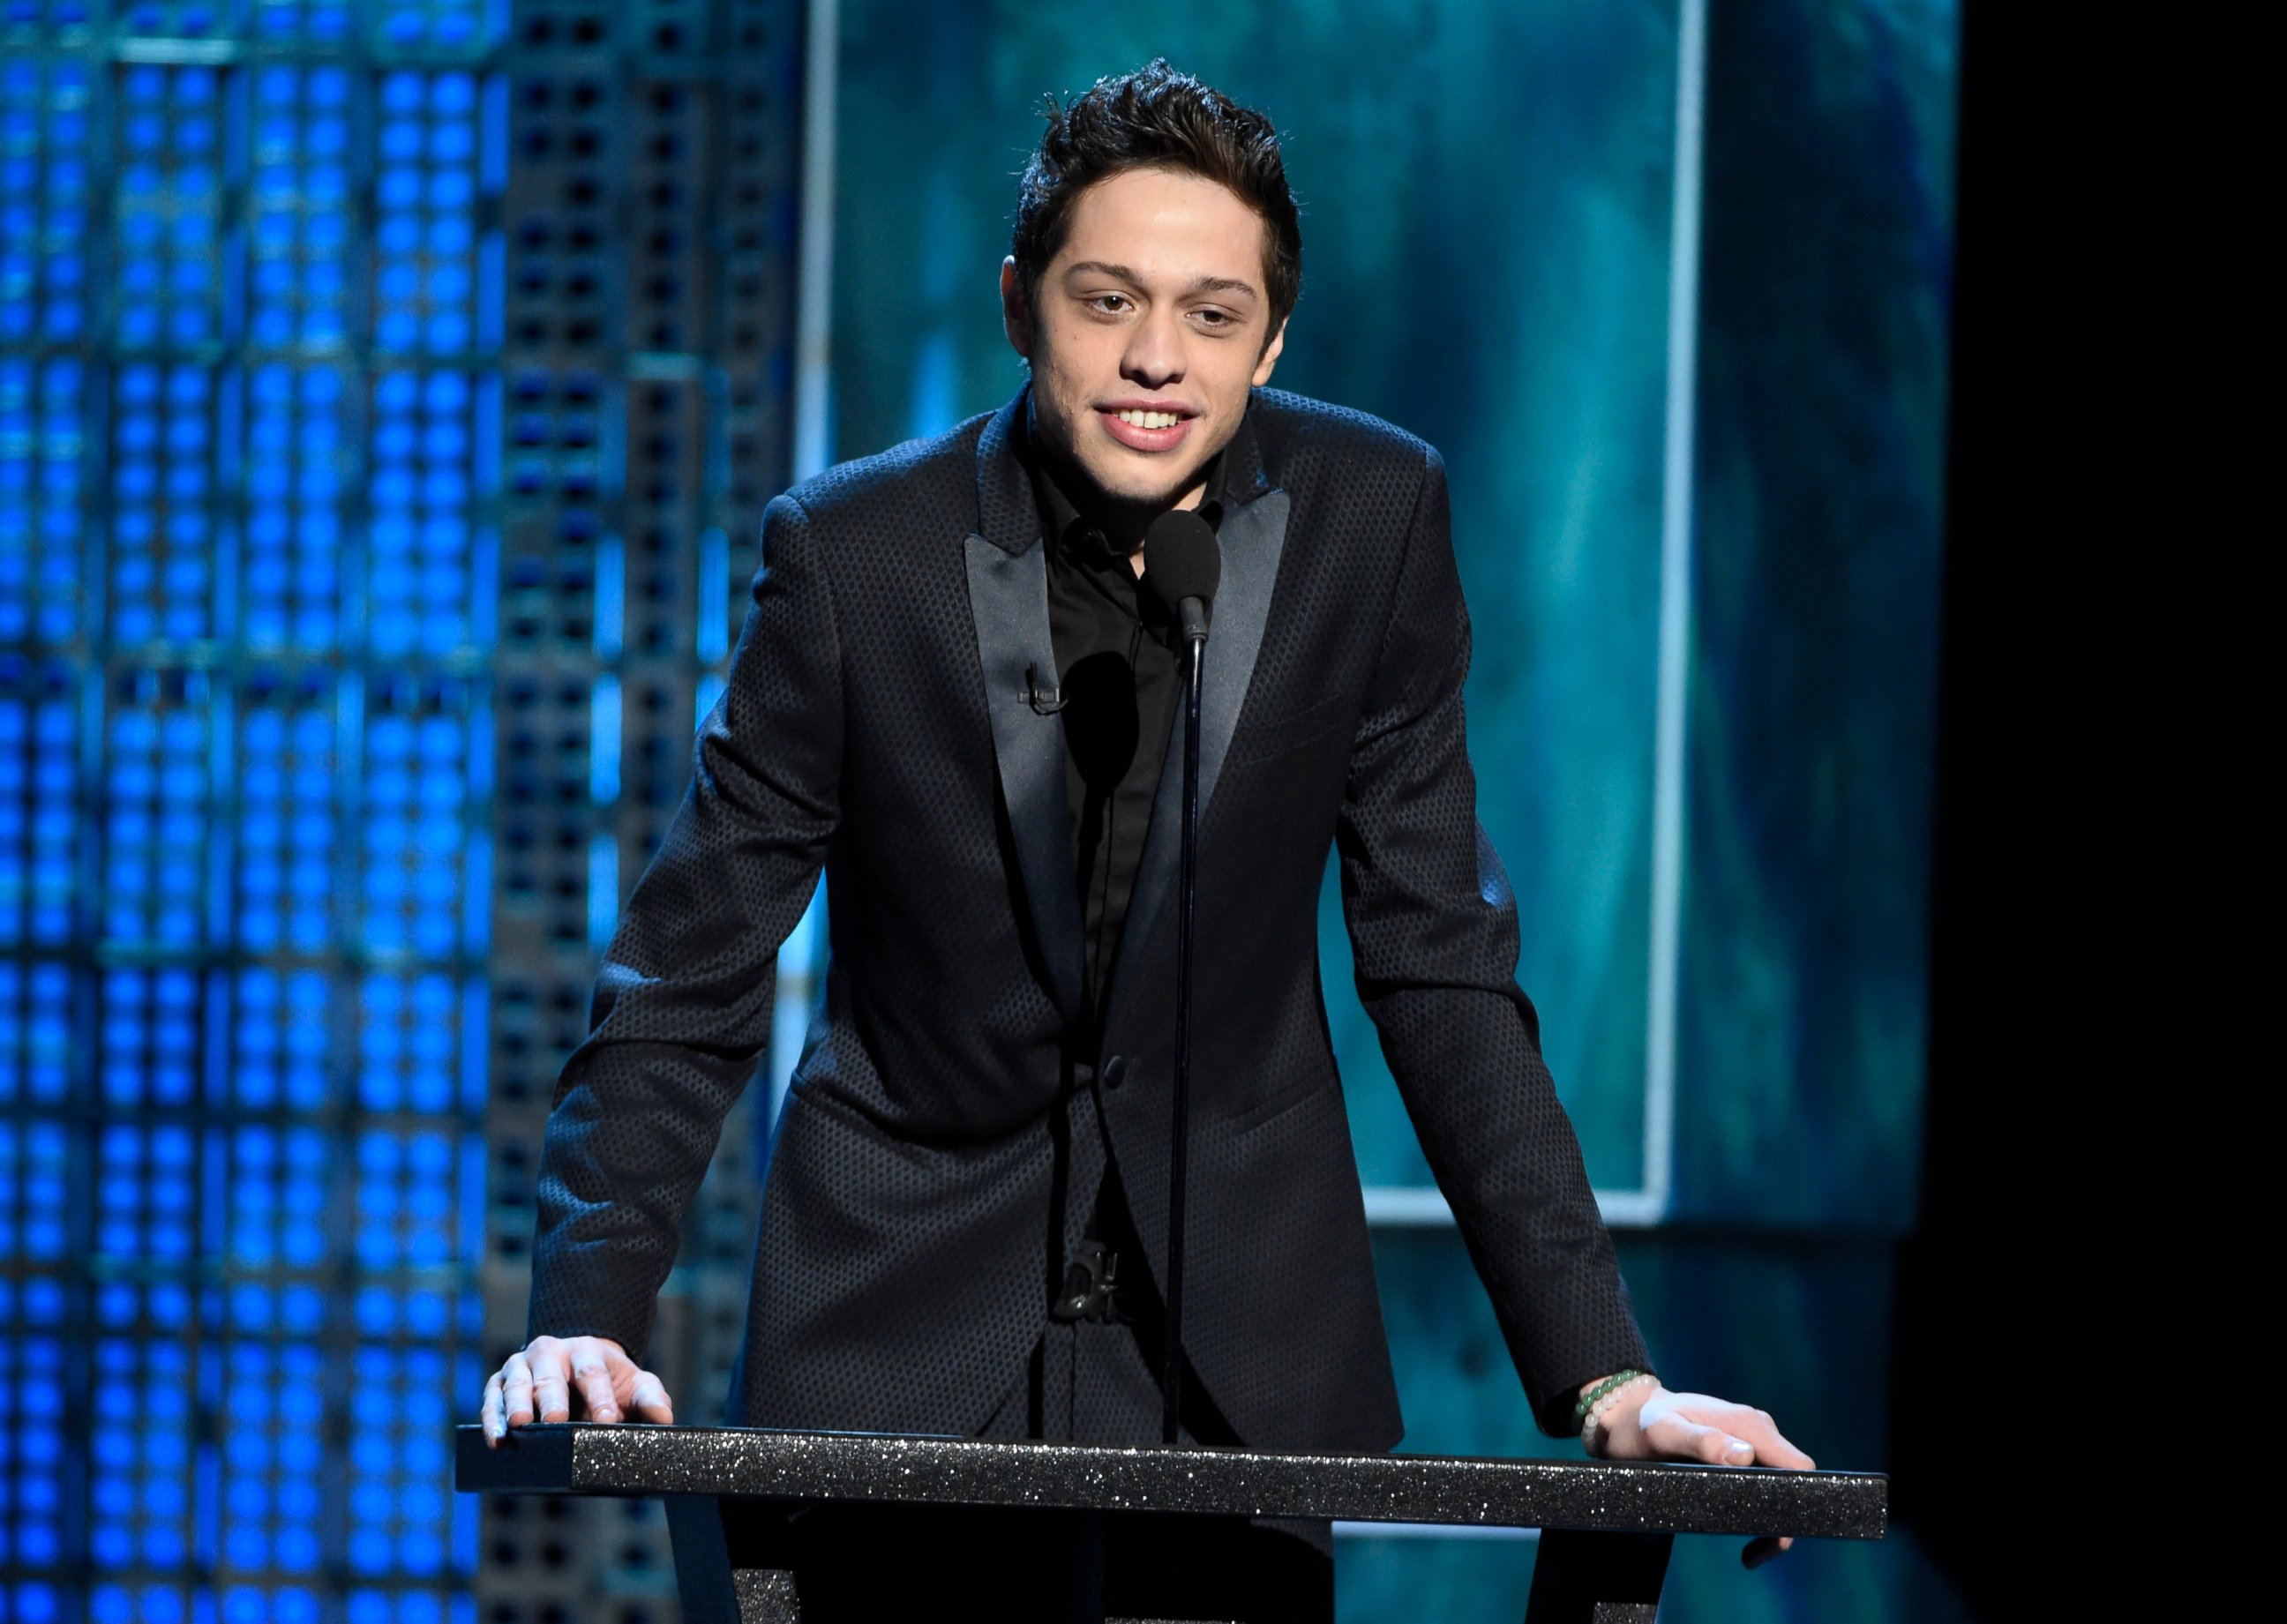 PHOTO: In this March 14, 2015, file photo, Pete Davidson speaks at a Comedy Central Roast at Sony Pictures Studios in Culver City, Calif.